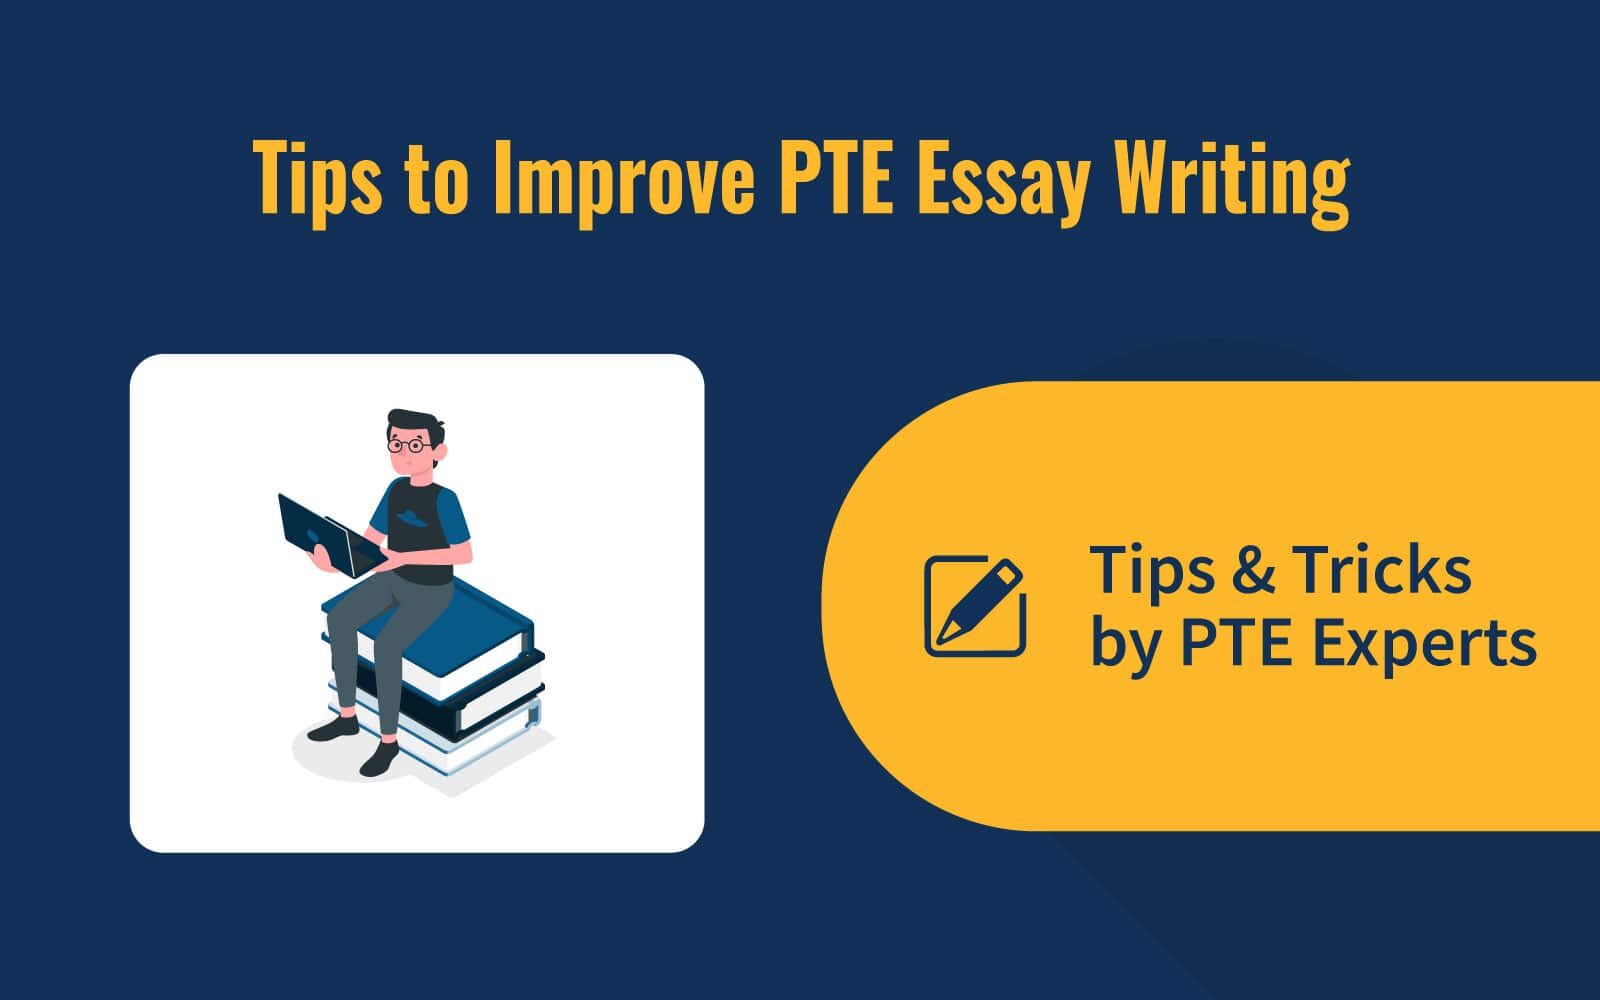 Tips to Improve PTE Essay Writing